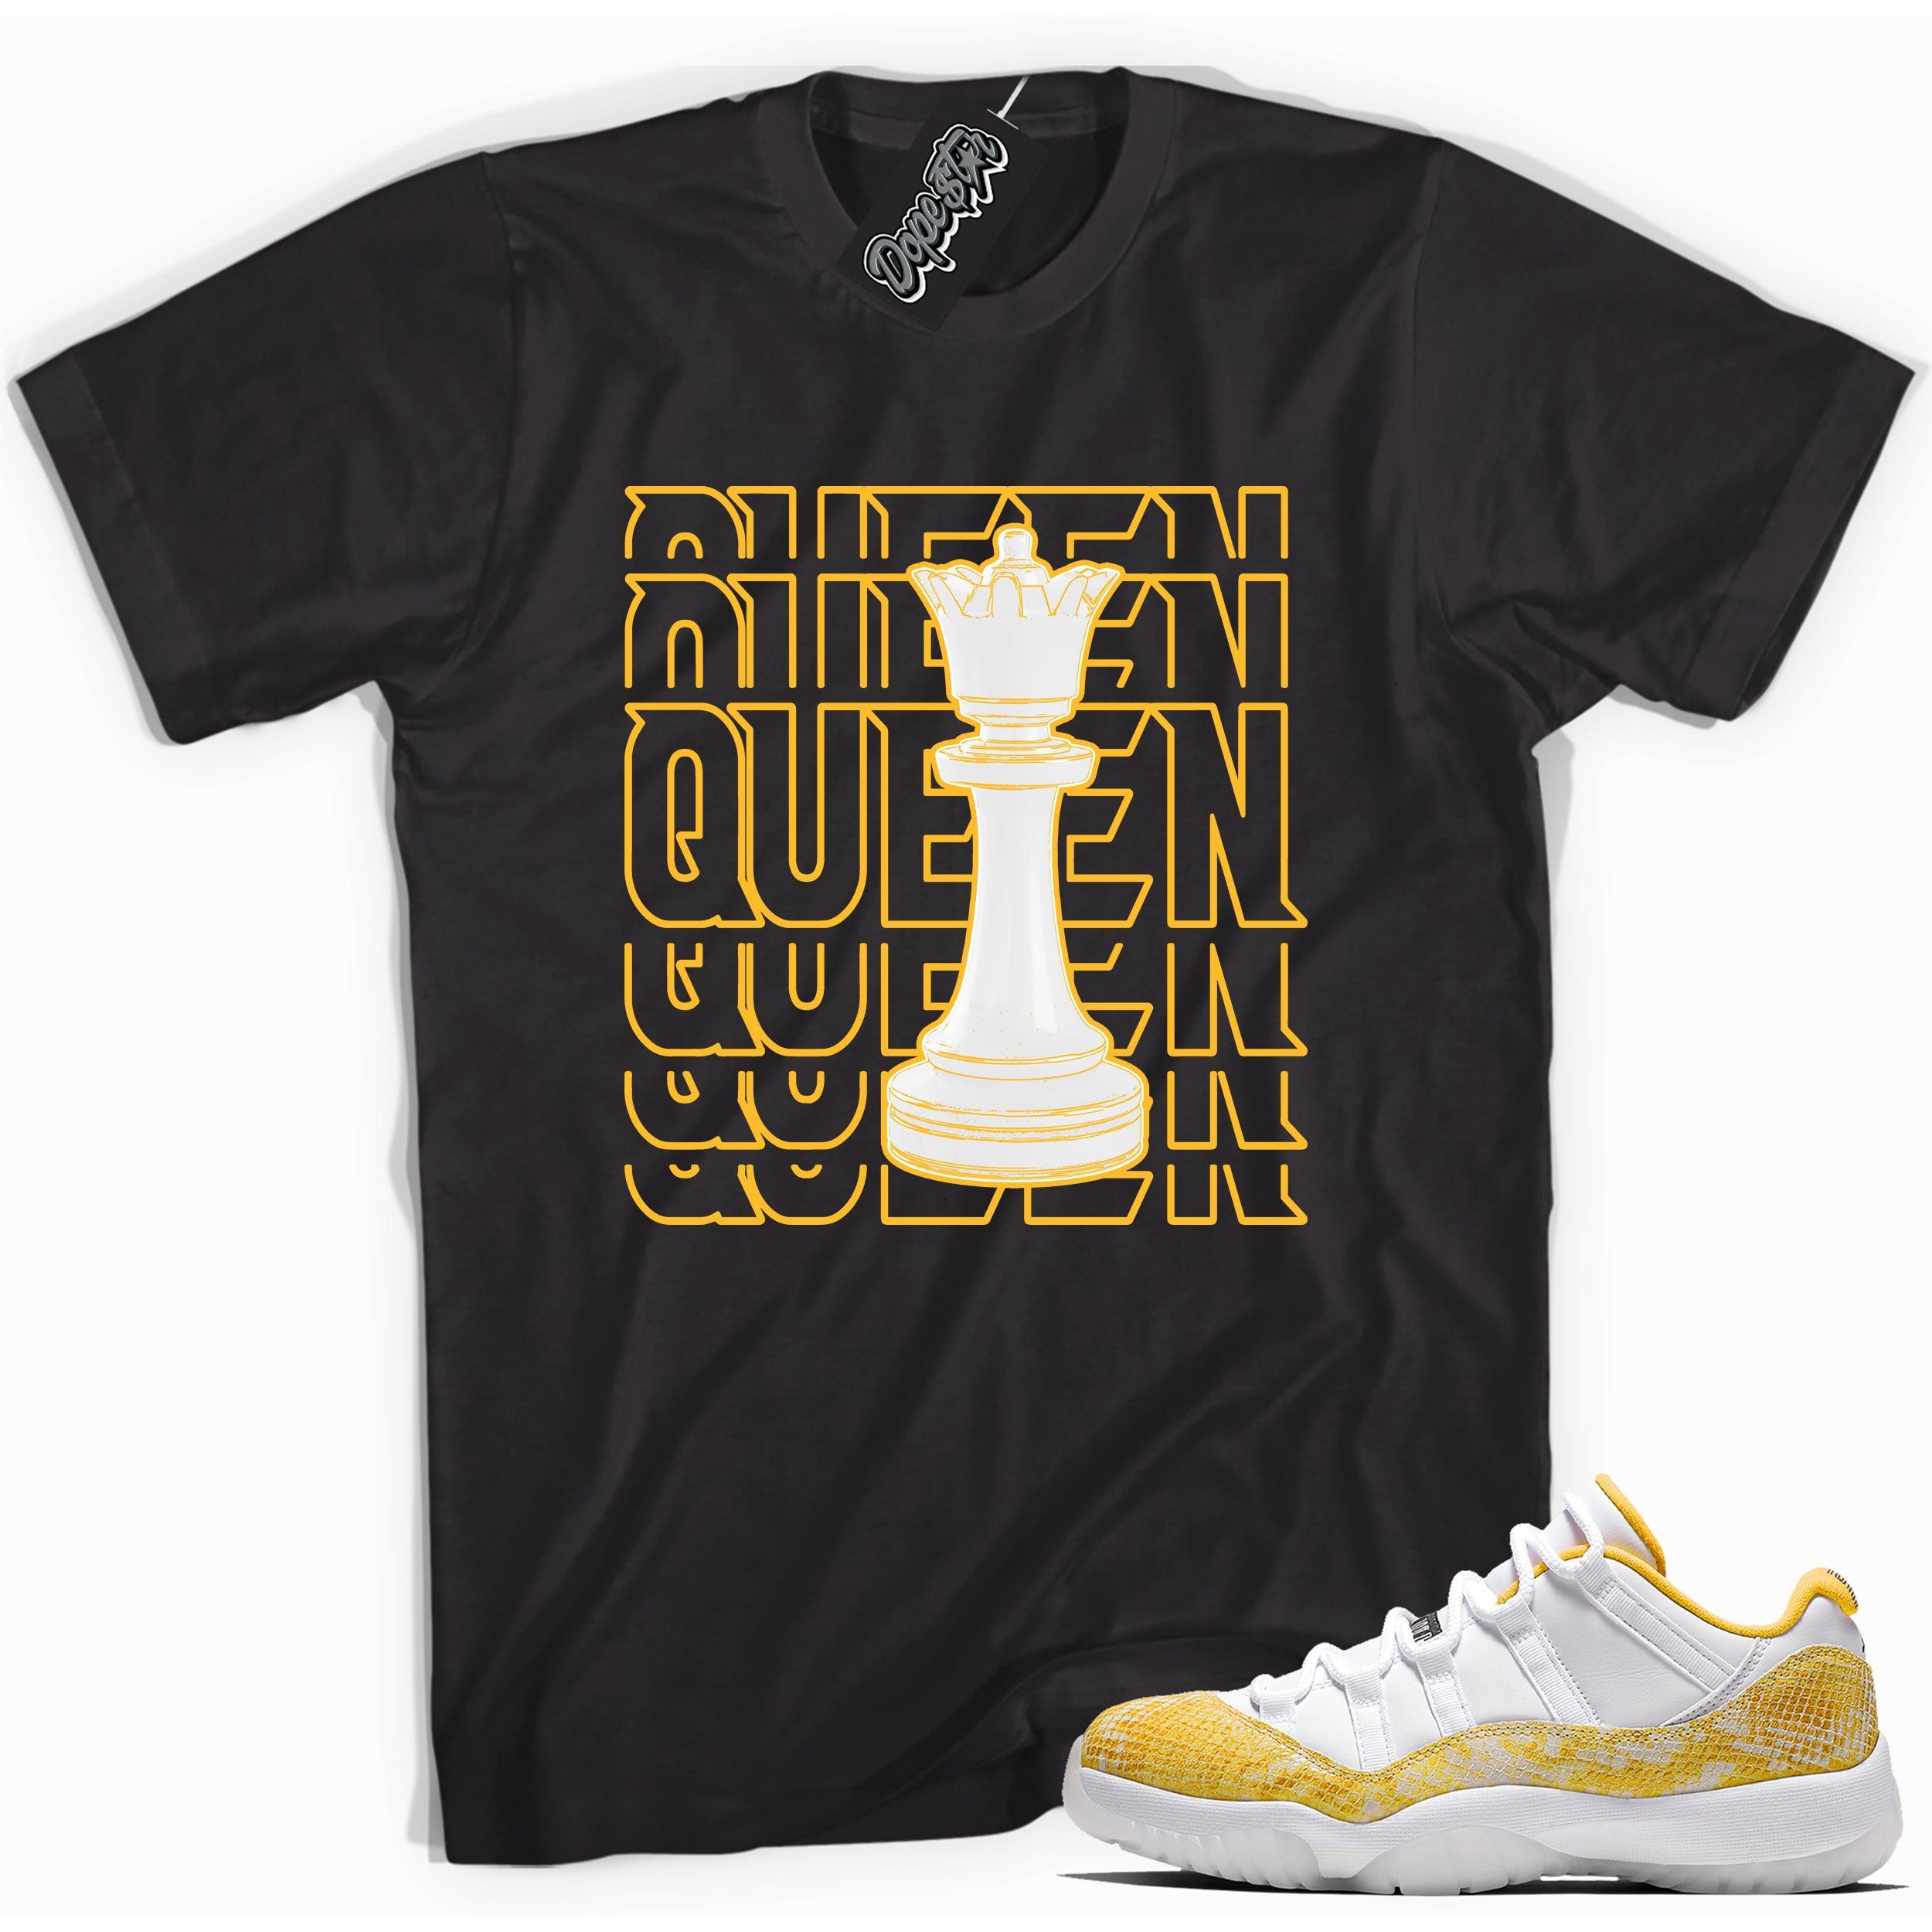 Cool black graphic tee with 'Queen' print, that perfectly matches  Air Jordan 11 Retro Low Yellow Snakeskin sneakers